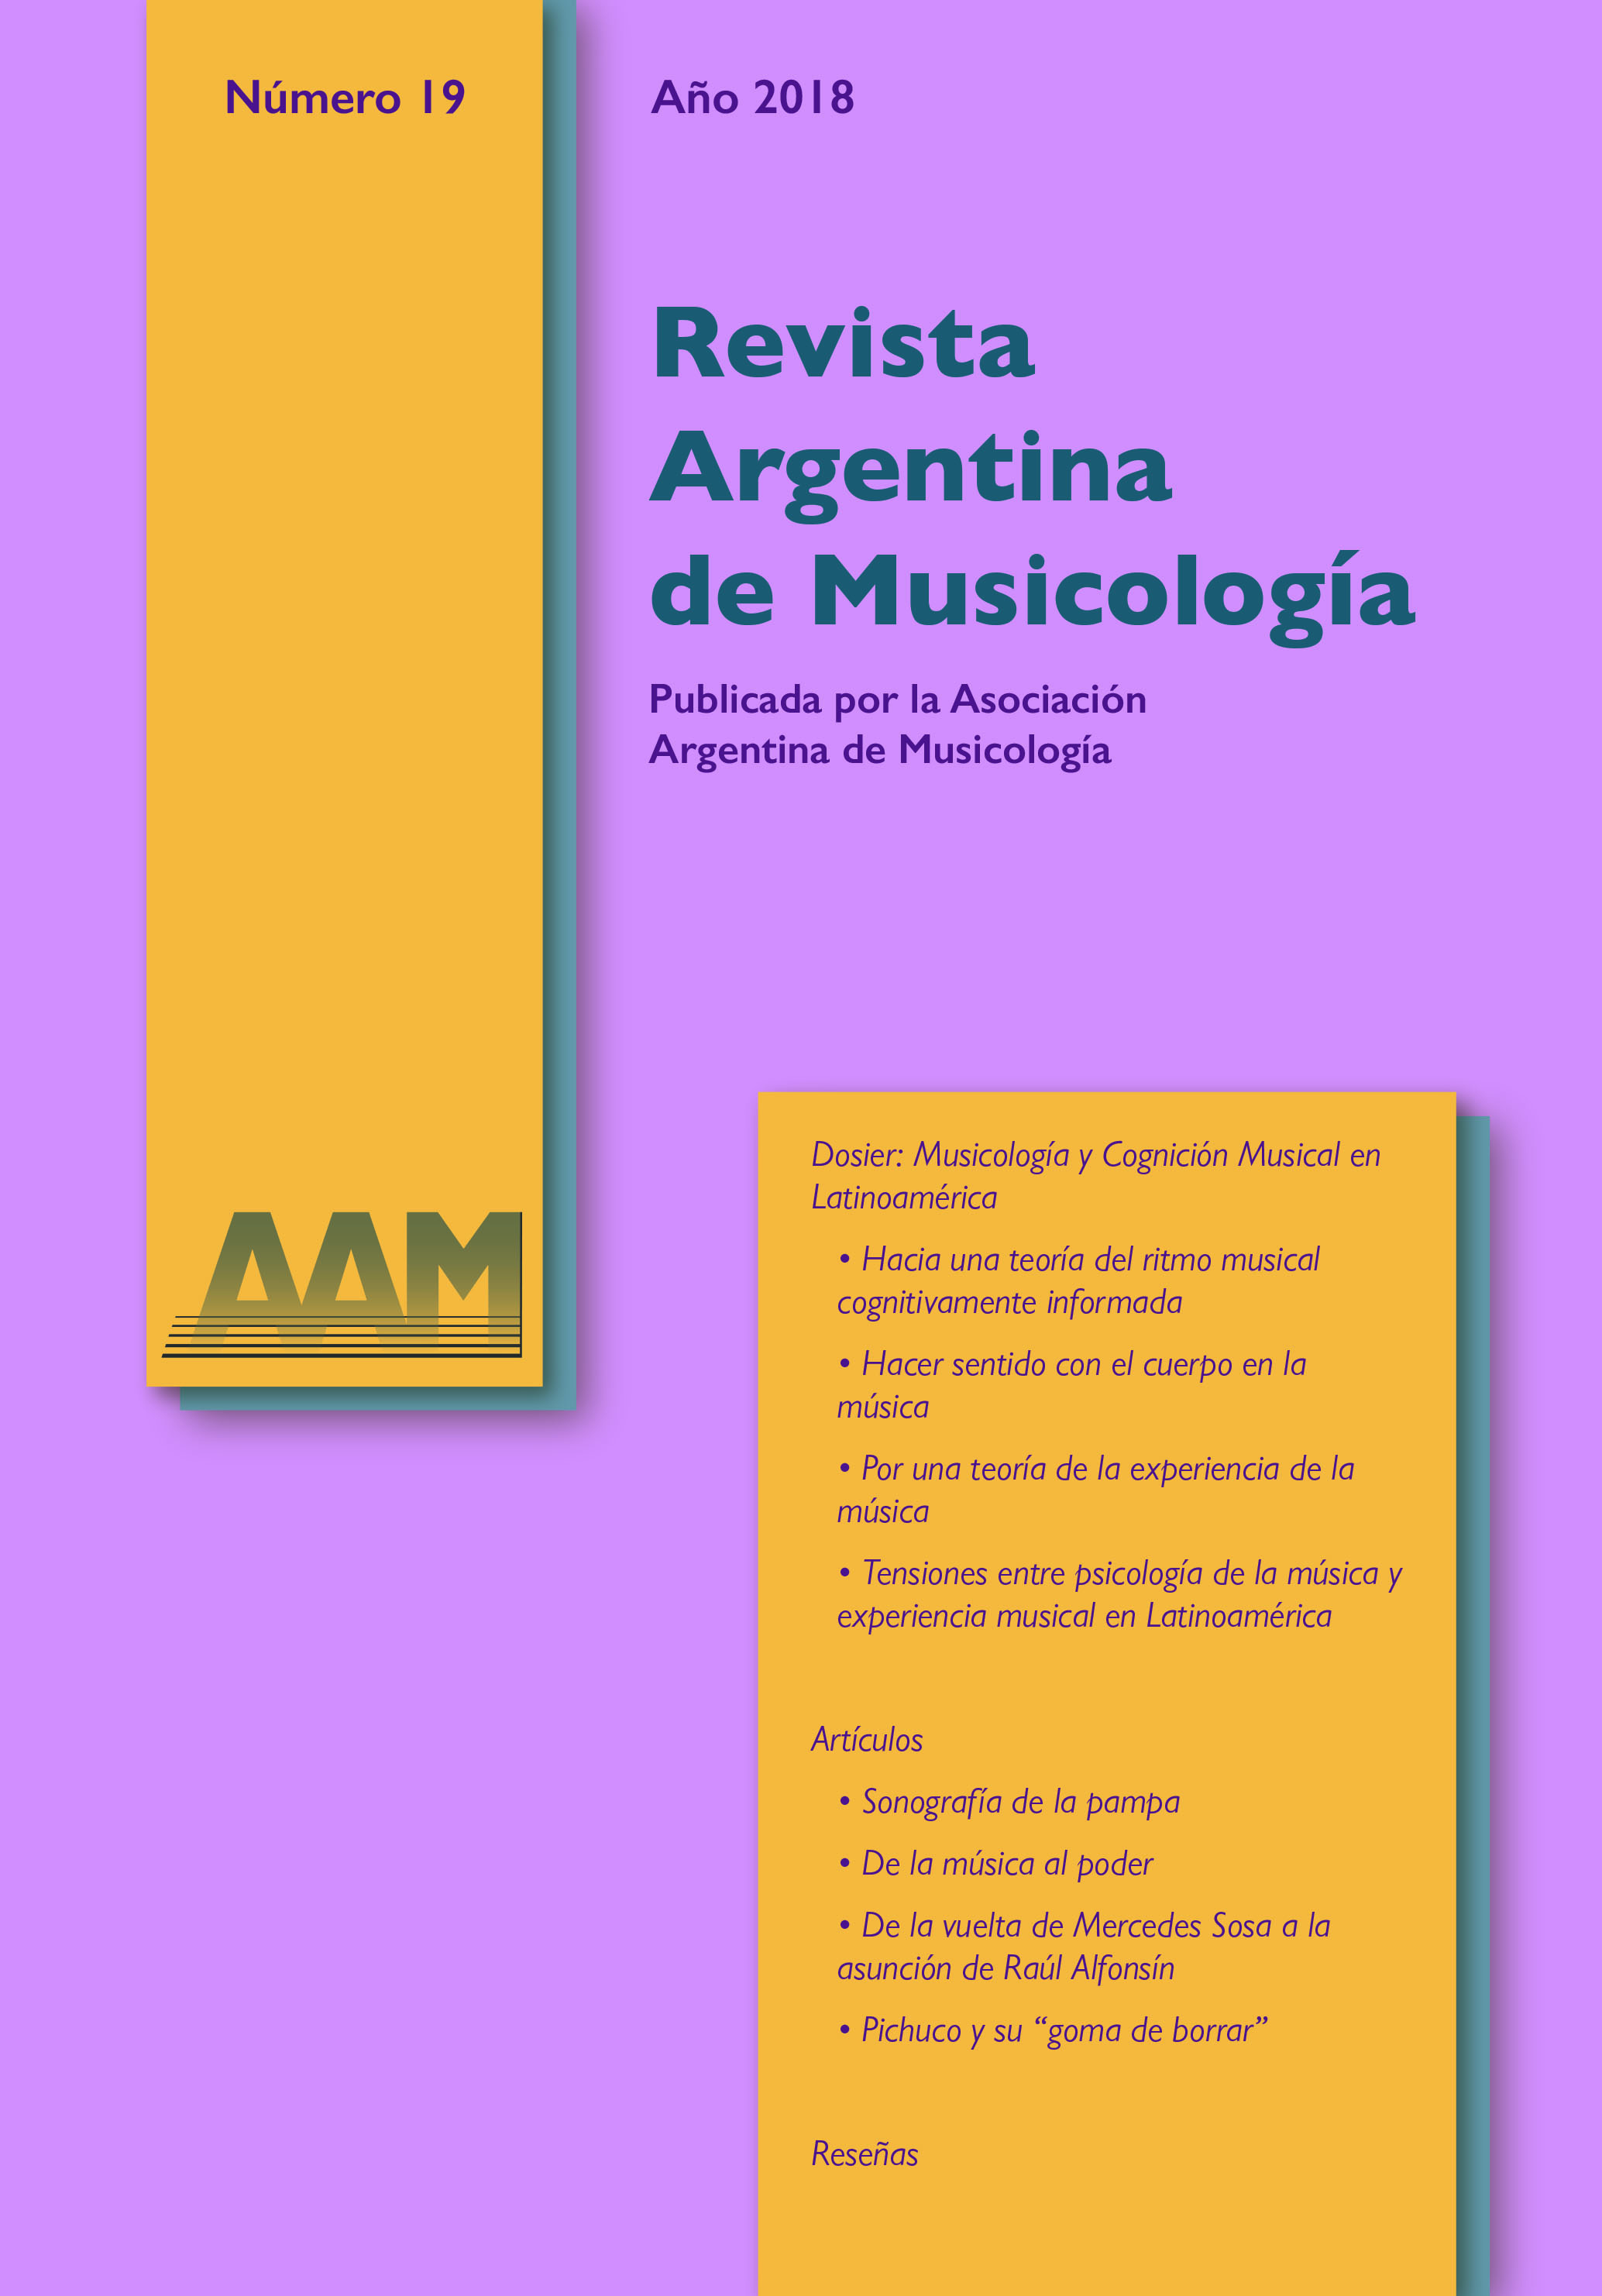 					View No. 19 (2018): Dosier: Musicology and Musical Cognition in Latin America
				